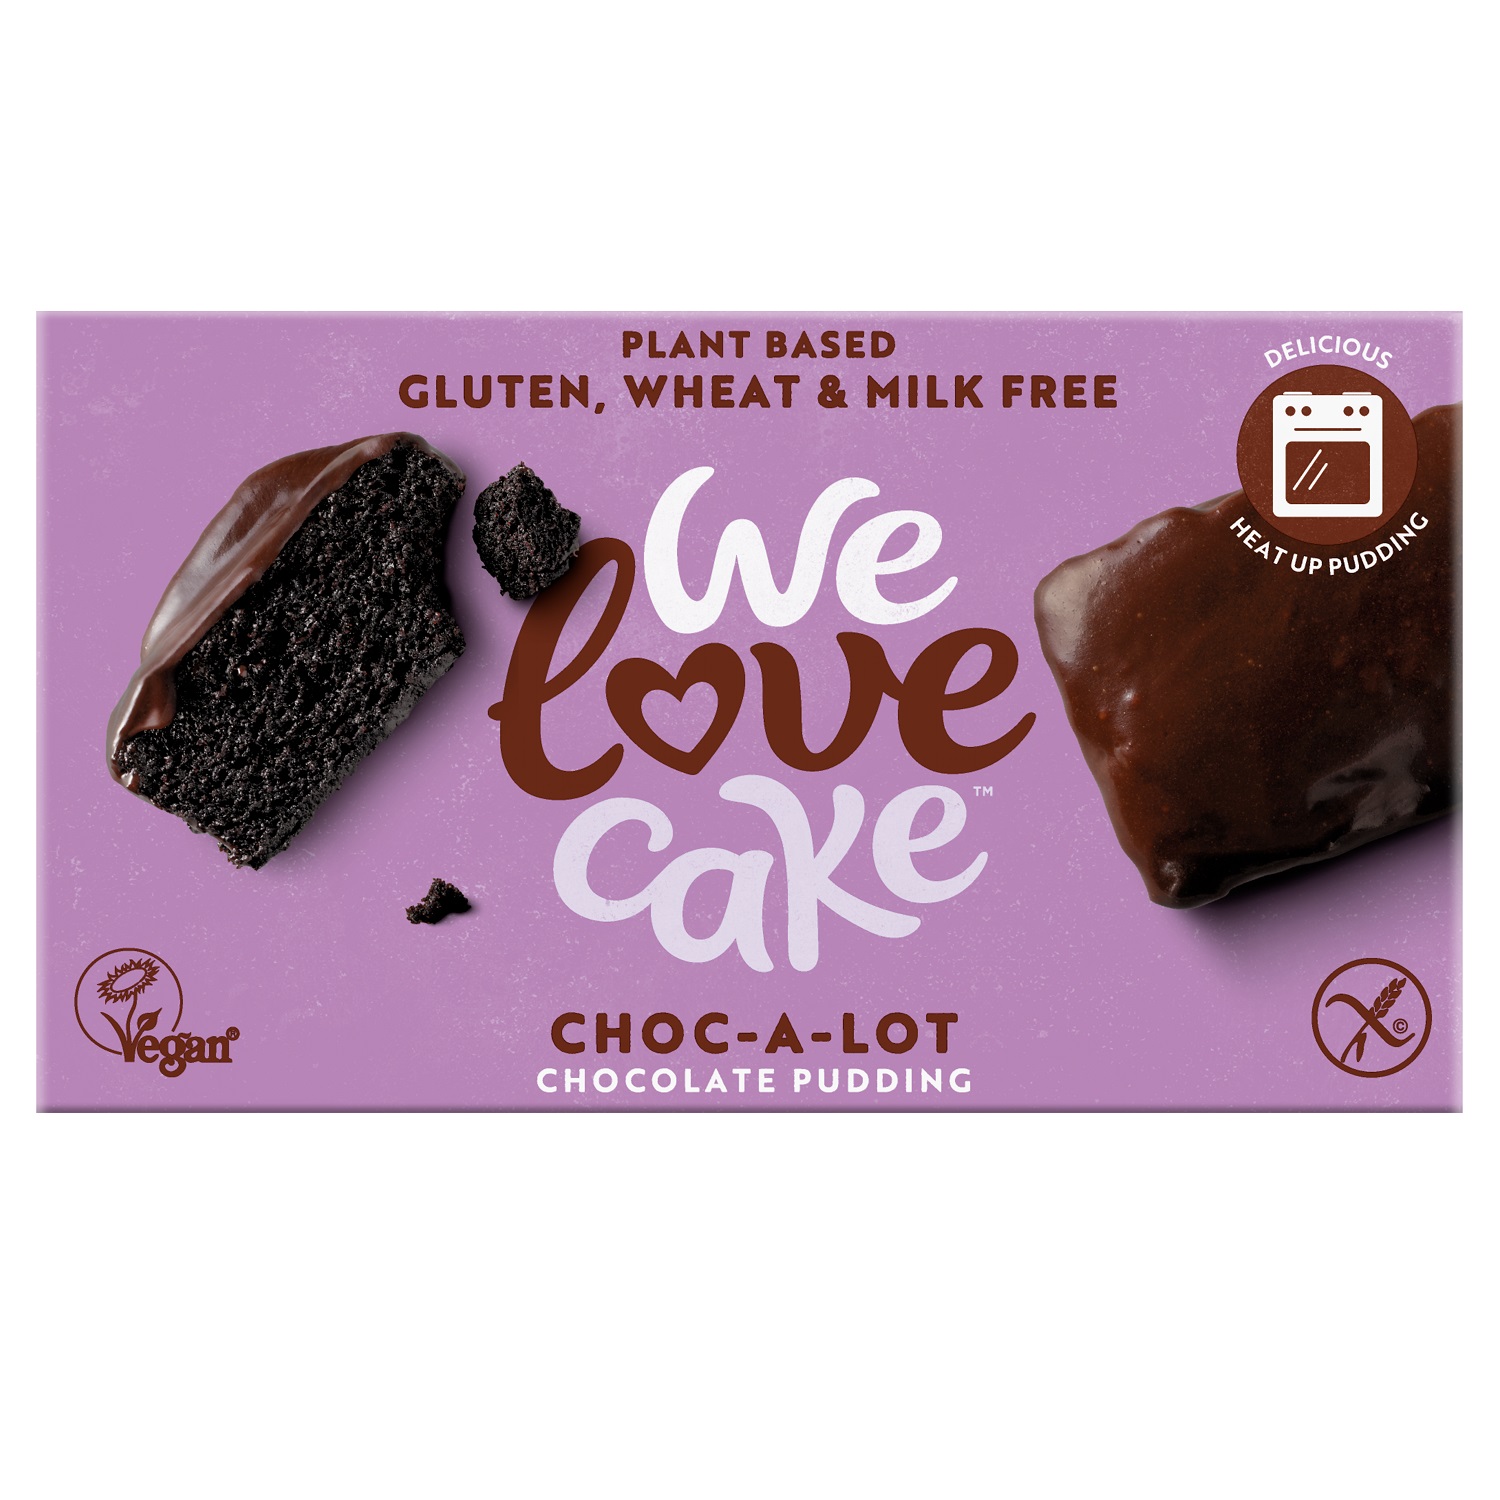 ‘We Love Cake’ launches puddings for Veganuary